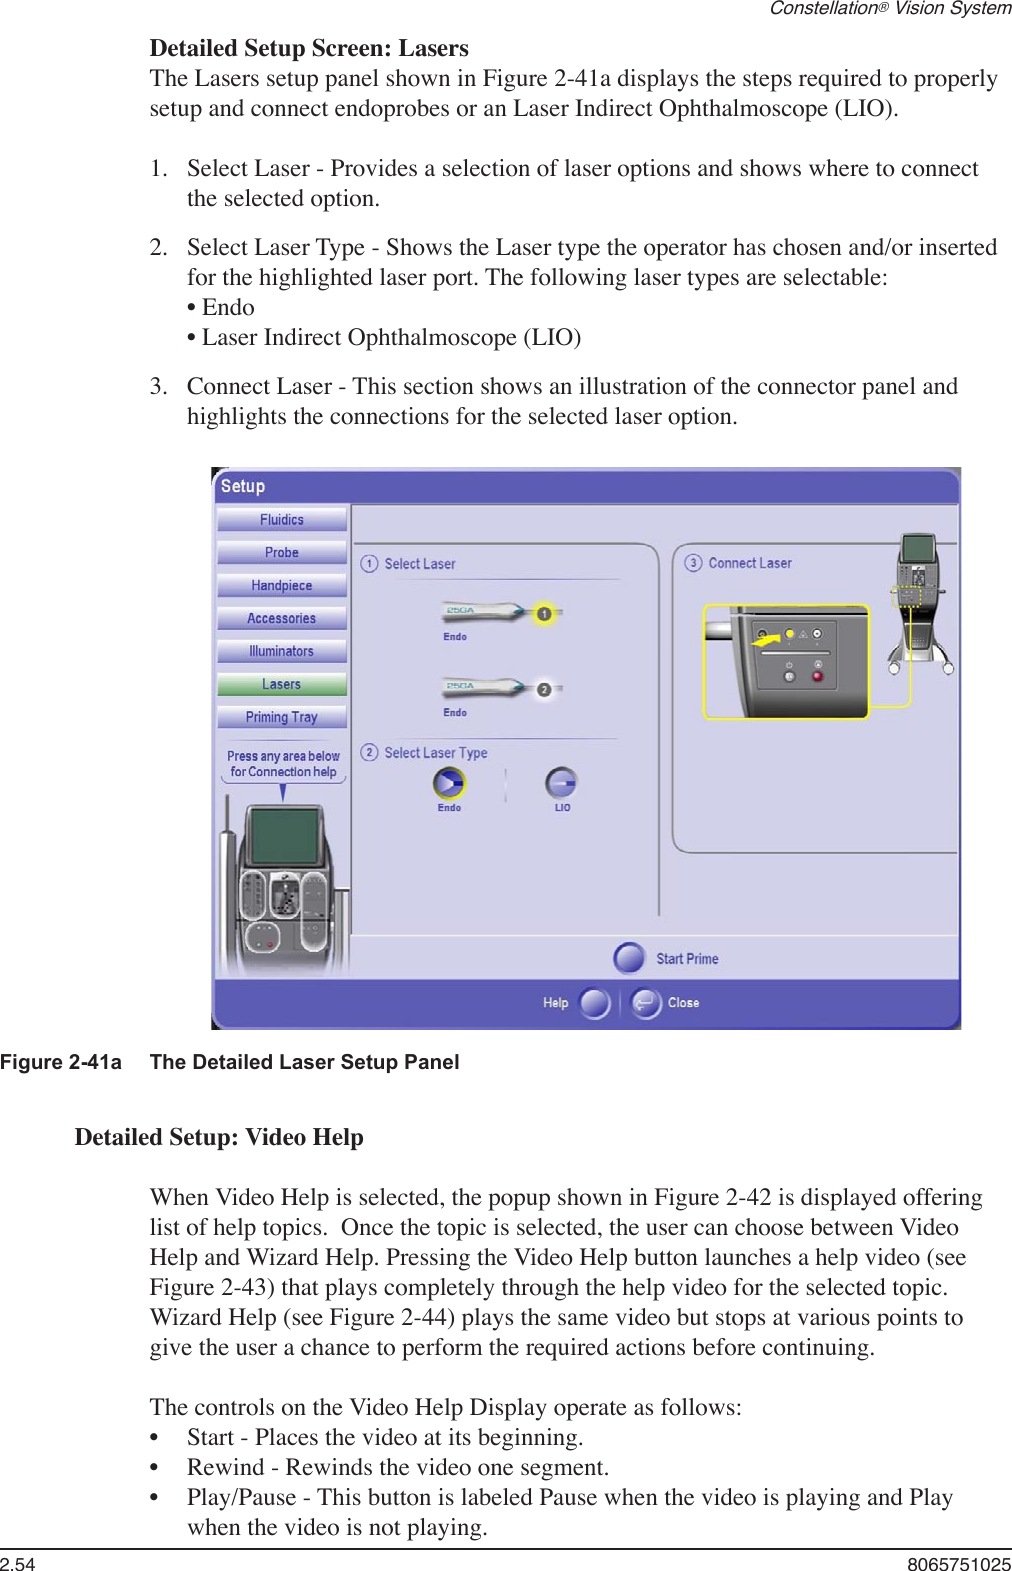 2.54  8065751025Constellation® Vision SystemFigure 2-41a  The Detailed Laser Setup Panel Detailed Setup Screen: LasersThe Lasers setup panel shown in Figure 2-41a displays the steps required to properly setup and connect endoprobes or an Laser Indirect Ophthalmoscope (LIO).Select Laser - Provides a selection of laser options and shows where to connect the selected option. Select Laser Type - Shows the Laser type the operator has chosen and/or inserted for the highlighted laser port. The following laser types are selectable: • Endo         • Laser Indirect Ophthalmoscope (LIO)  Connect Laser - This section shows an illustration of the connector panel and highlights the connections for the selected laser option.1.2.3.Detailed Setup: Video HelpWhen Video Help is selected, the popup shown in Figure 2-42 is displayed offering list of help topics.  Once the topic is selected, the user can choose between Video Help and Wizard Help. Pressing the Video Help button launches a help video (see Figure 2-43) that plays completely through the help video for the selected topic. Wizard Help (see Figure 2-44) plays the same video but stops at various points to give the user a chance to perform the required actions before continuing. The controls on the Video Help Display operate as follows:Start - Places the video at its beginning.Rewind - Rewinds the video one segment.Play/Pause - This button is labeled Pause when the video is playing and Play when the video is not playing.•••